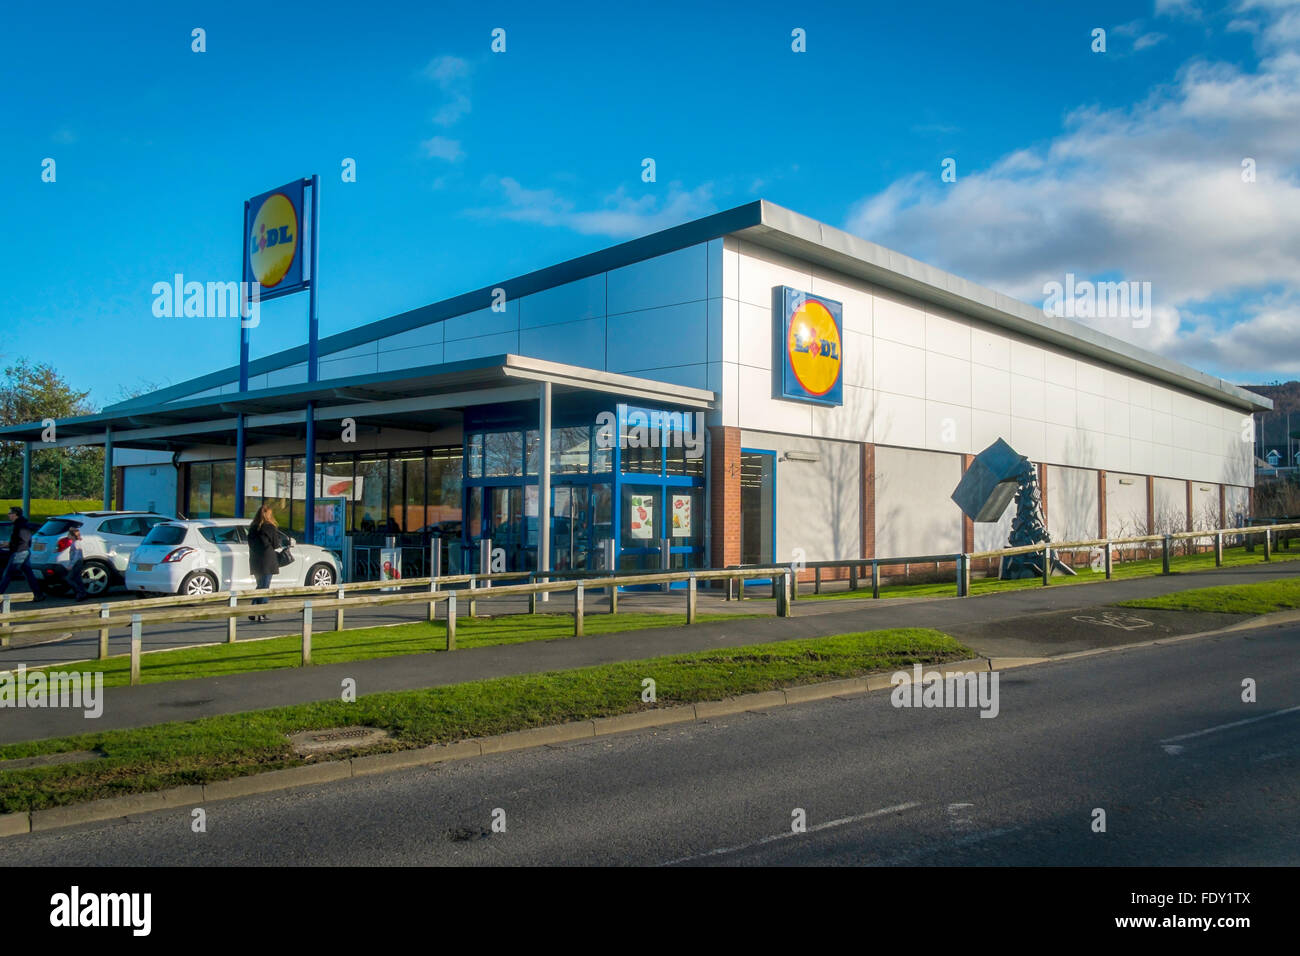 Lidl low cost supermarket in a small town Stock Photo